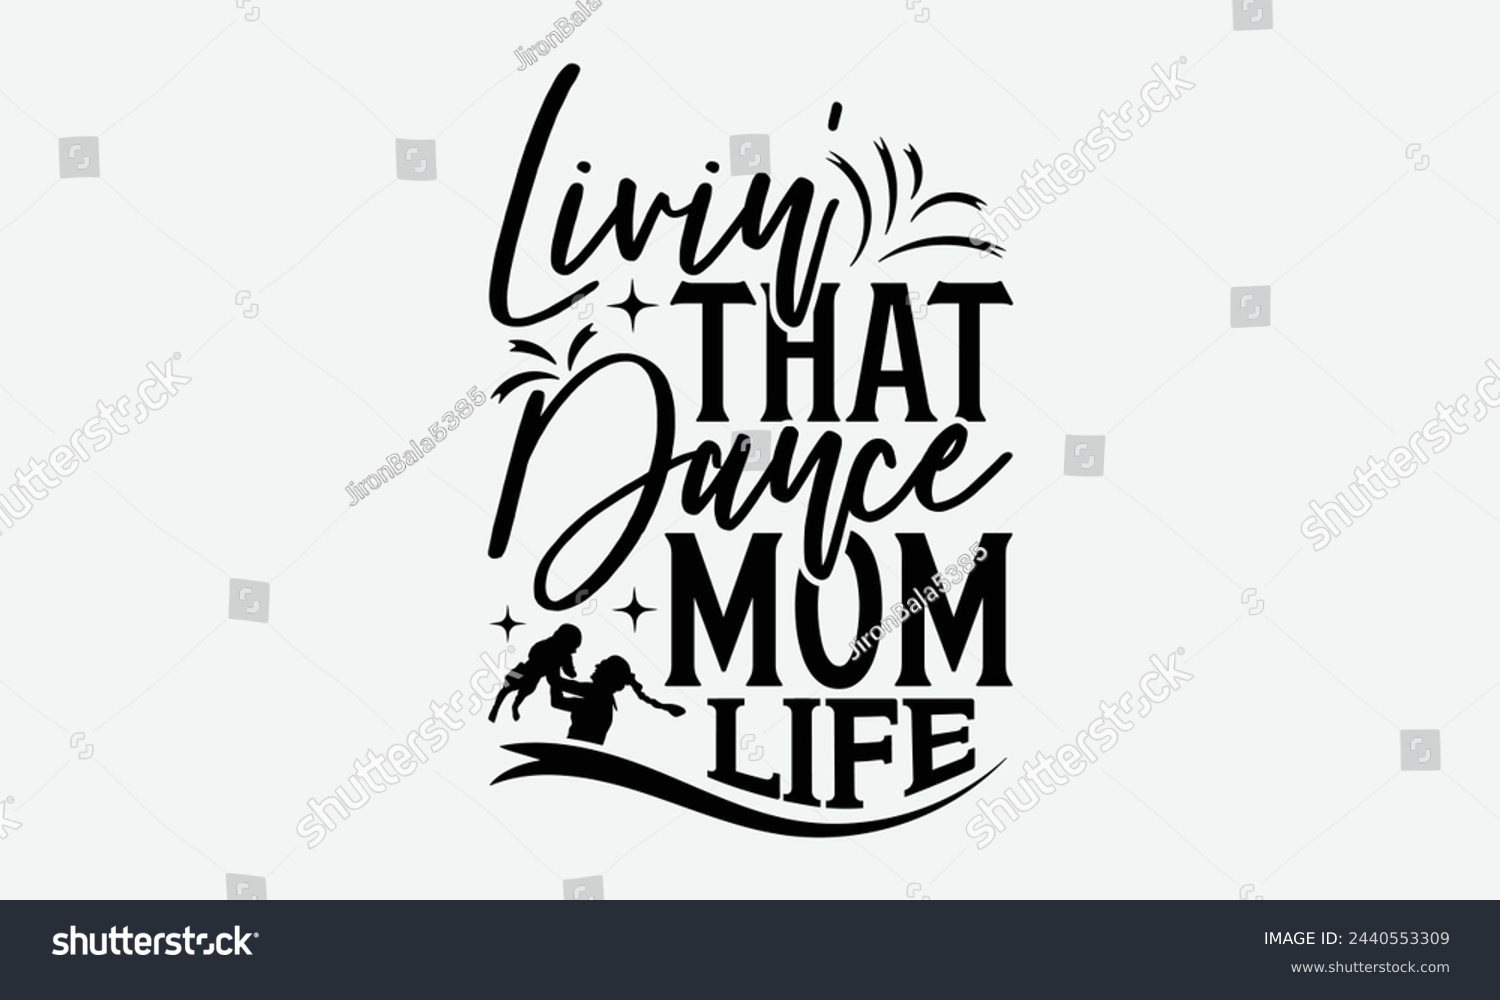 SVG of Livin’ That Dance Mom Life - Mom t-shirt design, isolated on white background, this illustration can be used as a print on t-shirts and bags, cover book, template, stationary or as a poster. svg